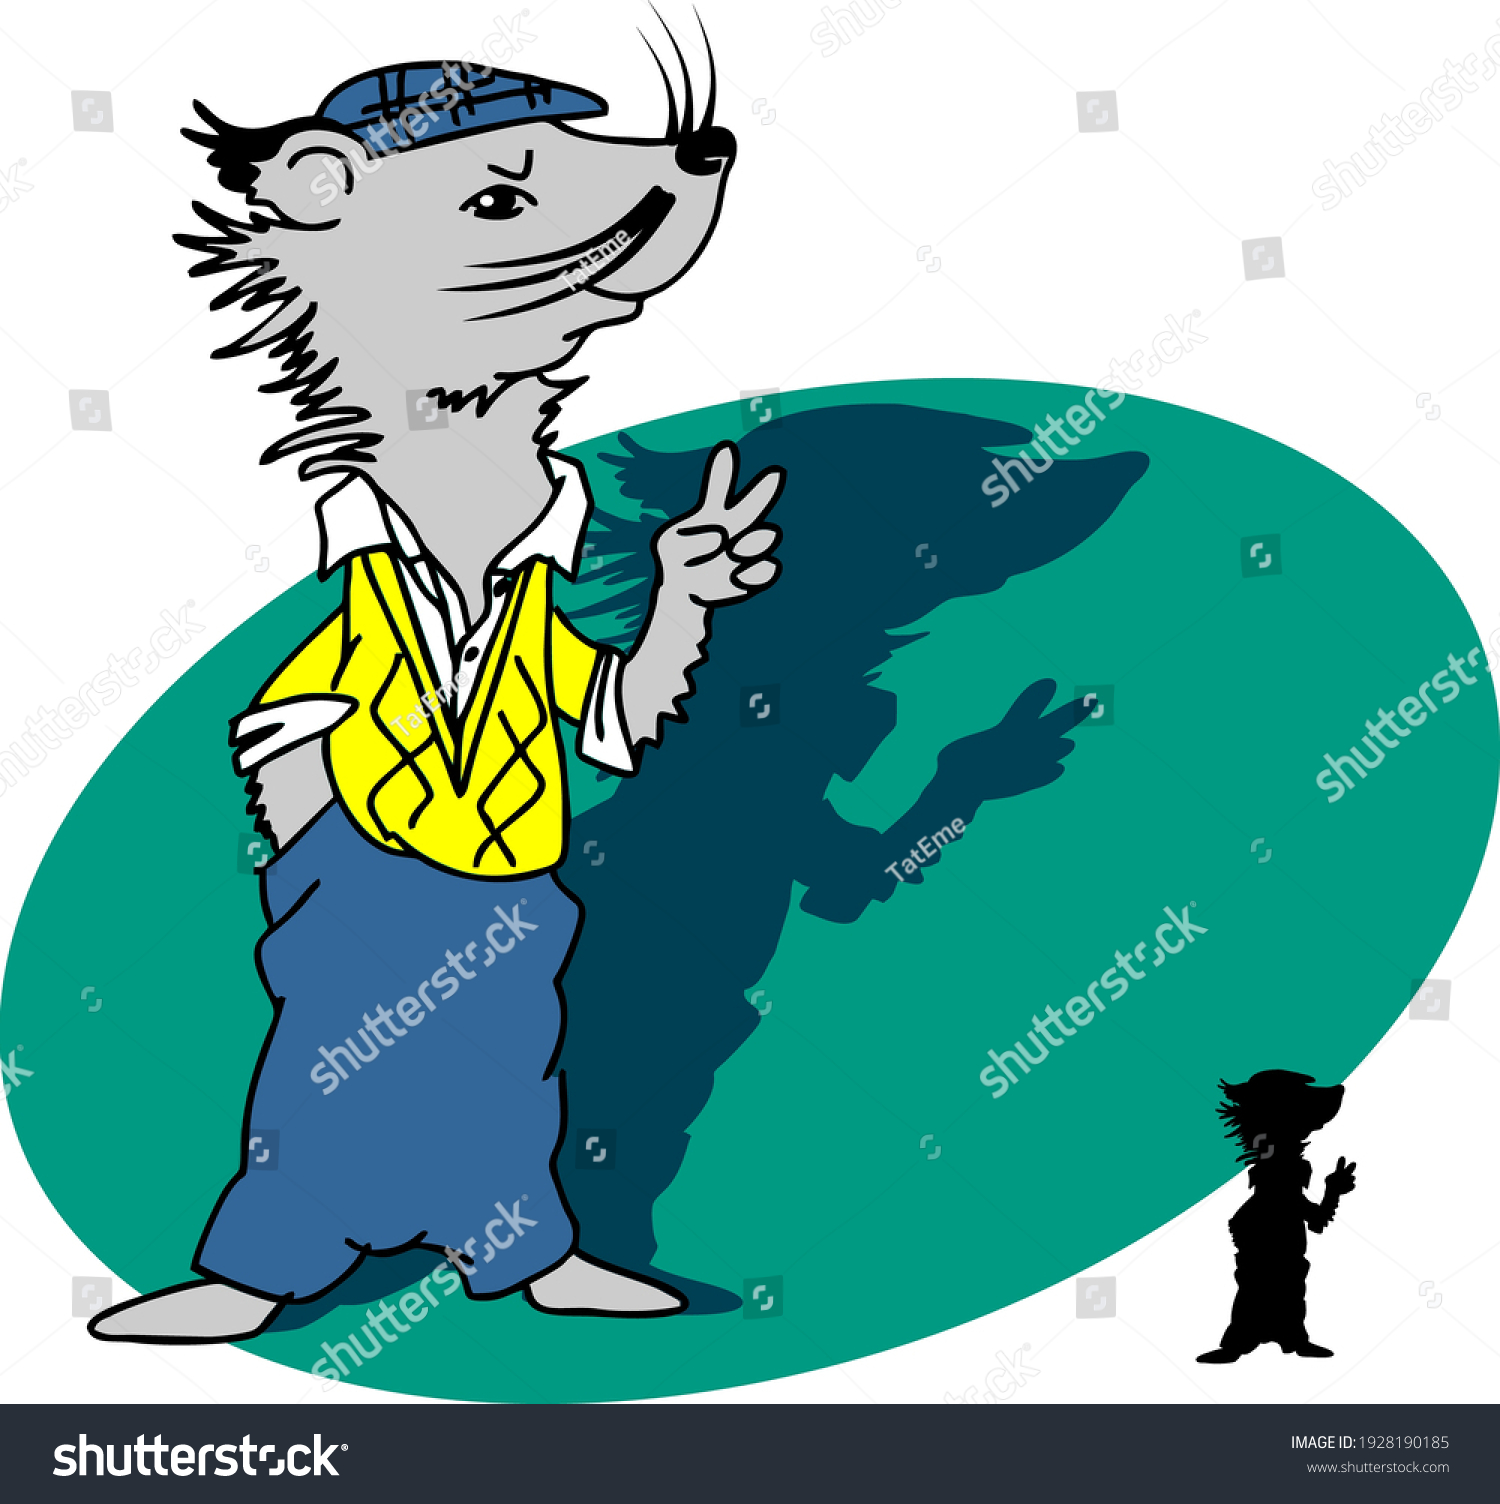 SVG of Cartoon image of a rare animal cat bear binturong in the role of a business man. svg